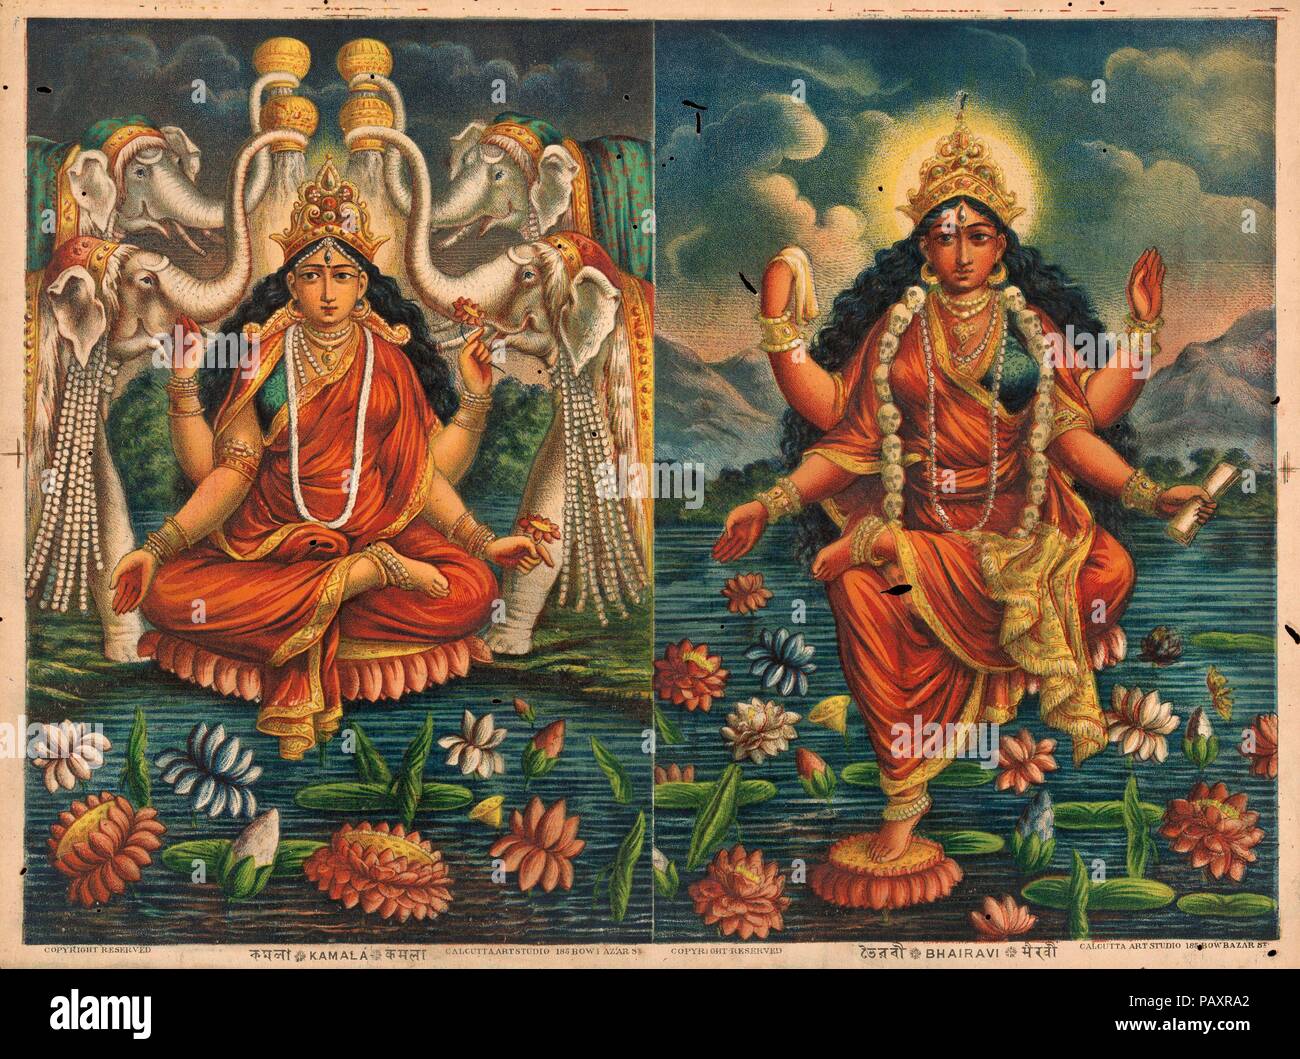 Kamala/ Bhairavi. Culture: India. Dimensions: Image: 11 1/4 × 15 1/4 in. (28.6 × 38.7 cm)  Sheet: 12 × 16 in. (30.5 × 40.6 cm). Date: 1885-90.  Kamala and Bhairavi are two of the ten Mahavidyas or great manifestations of Devi (deified aspects of the goddess that range from pacific to ferocious).   On the left, four elephants lustrate the goddess who is identified in a below label as Kamala.  She holds lotuses in her two left hands while her upper right is in the abhaya mudra (reassurance) and her lower right is in the varada mudra (boon giving).  She sits on a lotus and in fact, her name means Stock Photo